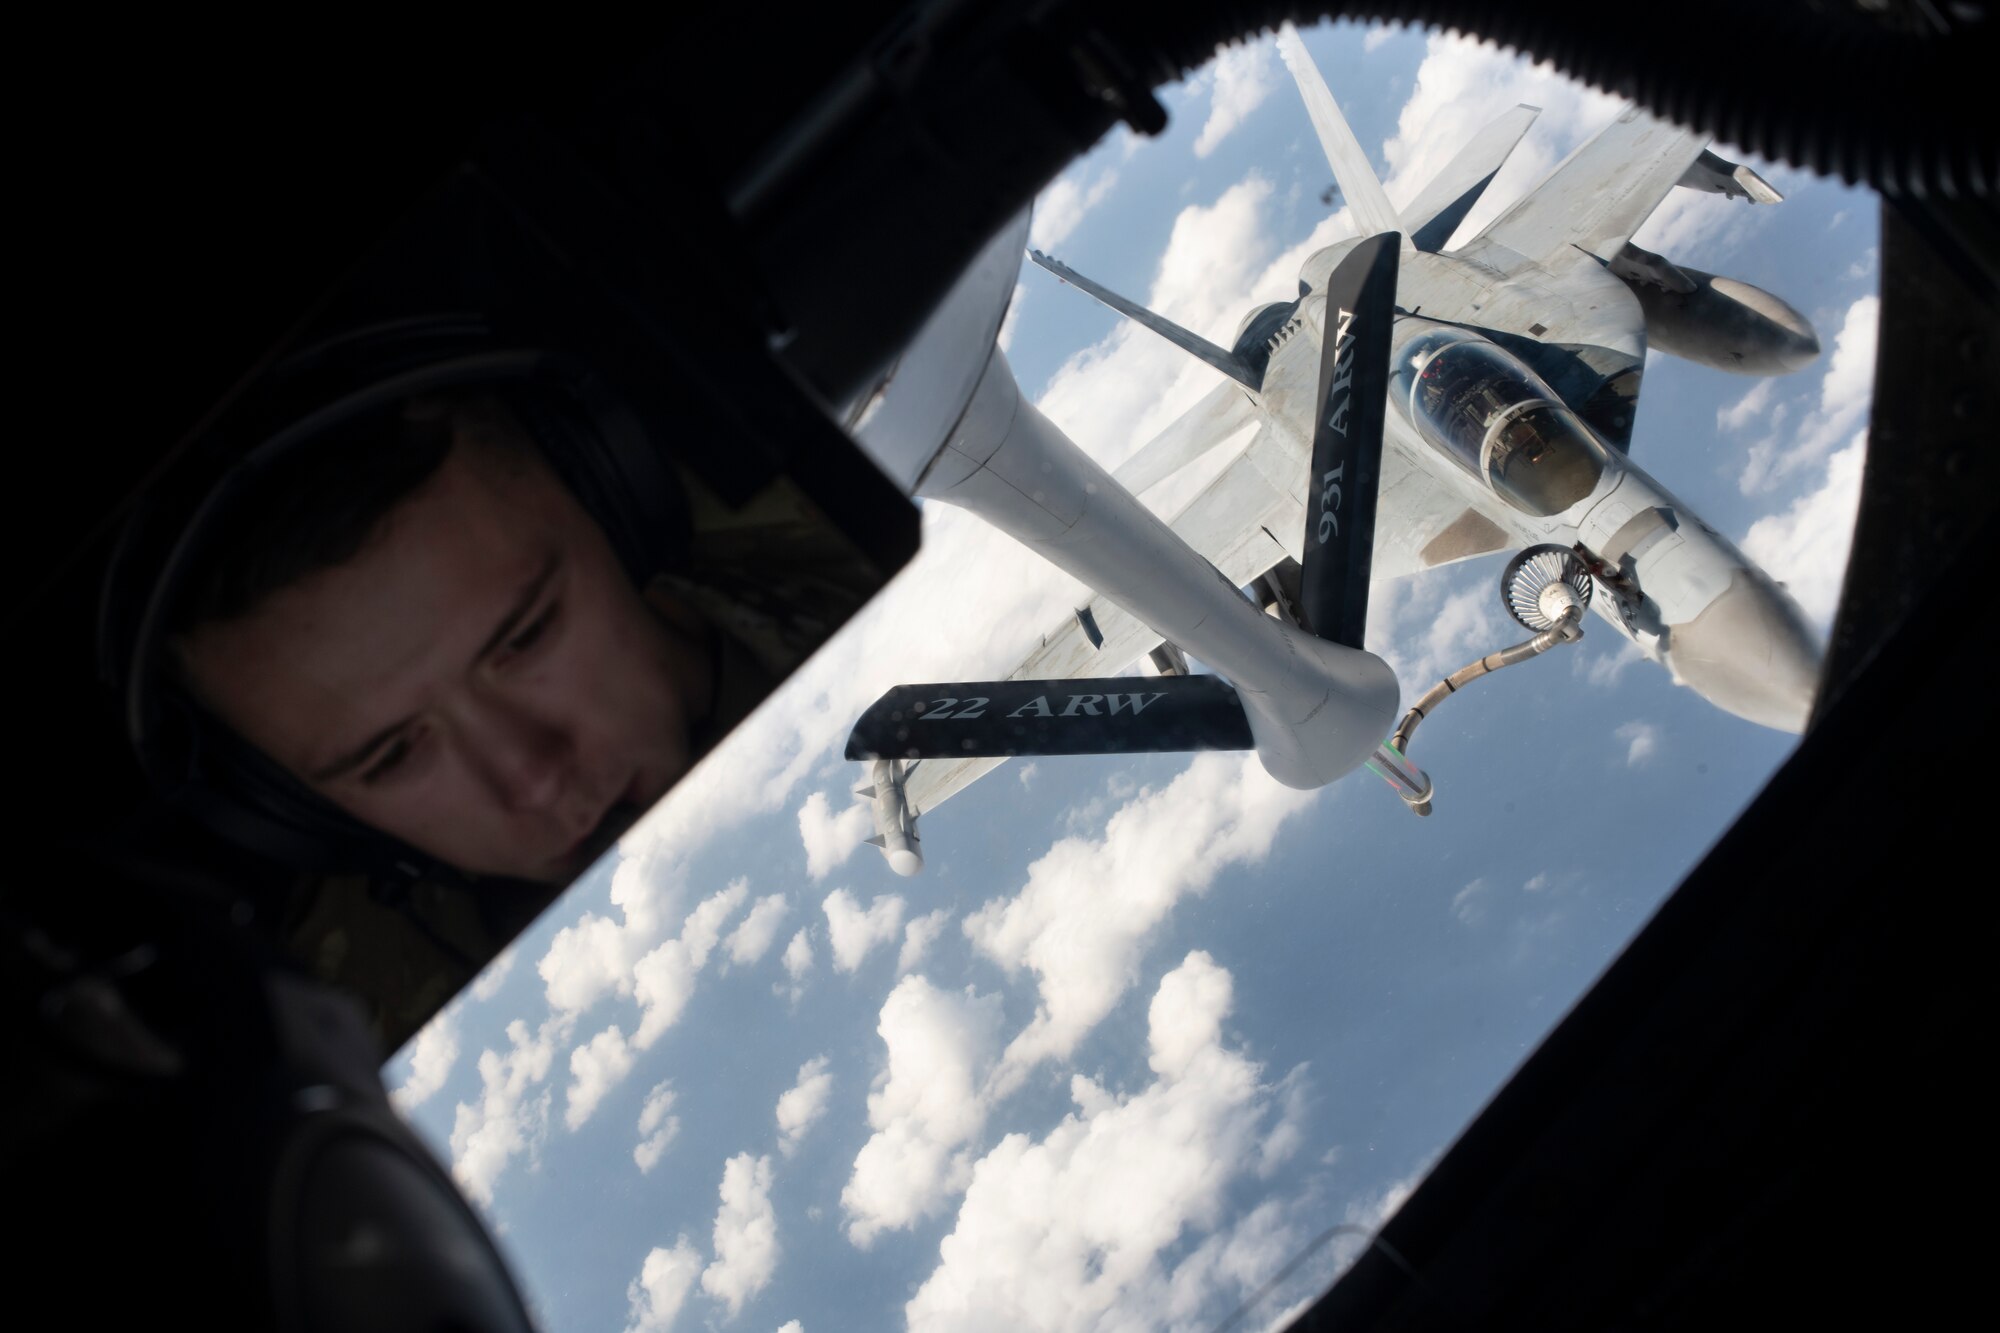 Airman 1st Class Ethan Parker, 909th Air Refueling Squadron boom operator, oversees the refueling of a U.S. Navy F/A-18 Super Hornet during a joint training exercise over the Pacific Ocean, Oct. 24, 2022. Joint training improves interoperability among U.S. forces and enables more effective teamwork during real-world engagements. (U.S. Air Force photo by Senior Airman Jessi Roth)